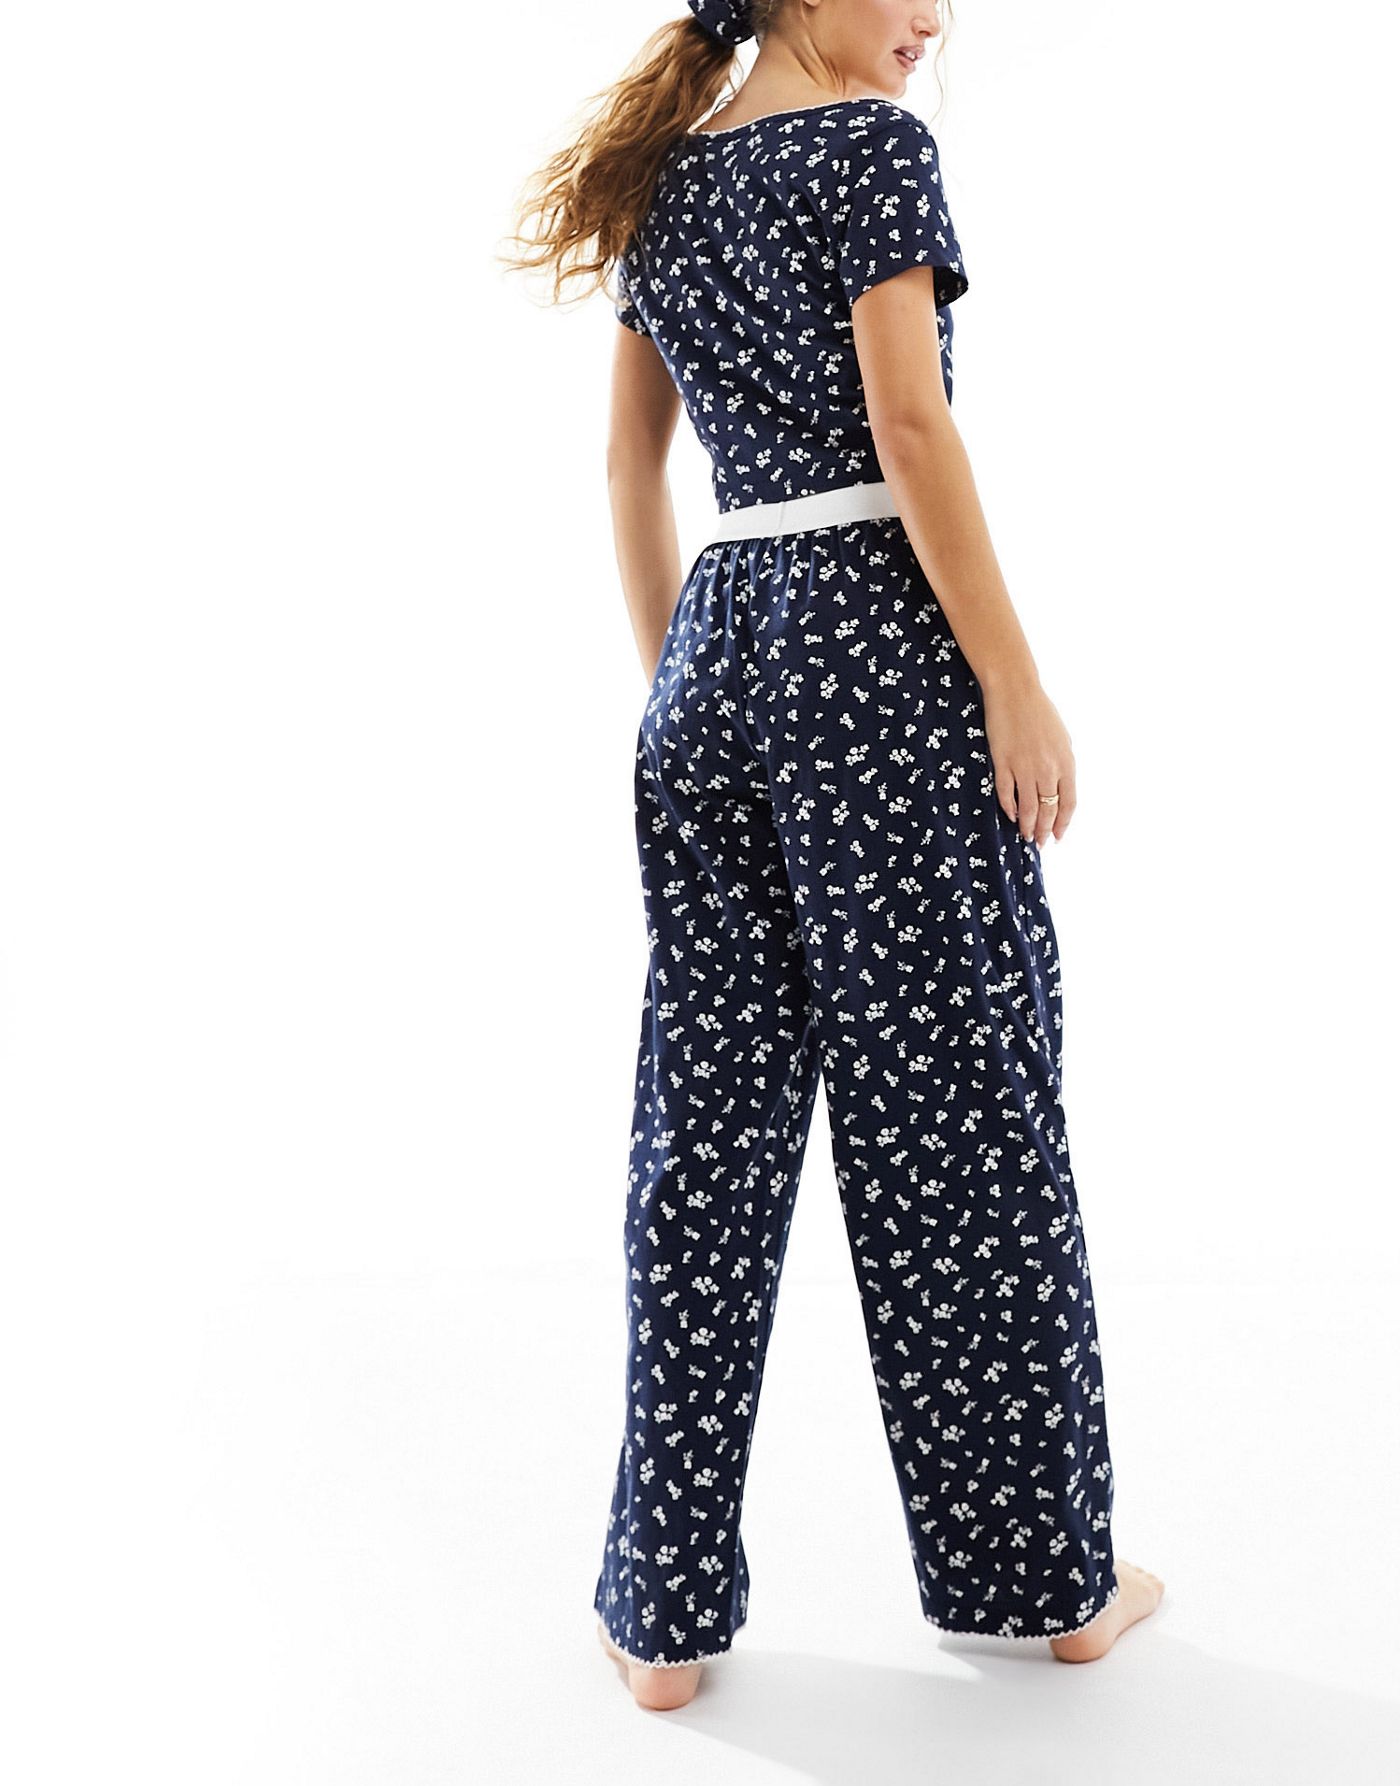 ASOS DESIGN Petite mix & match ditsy print pyjama trouser with exposed waistband and picot trim in navy